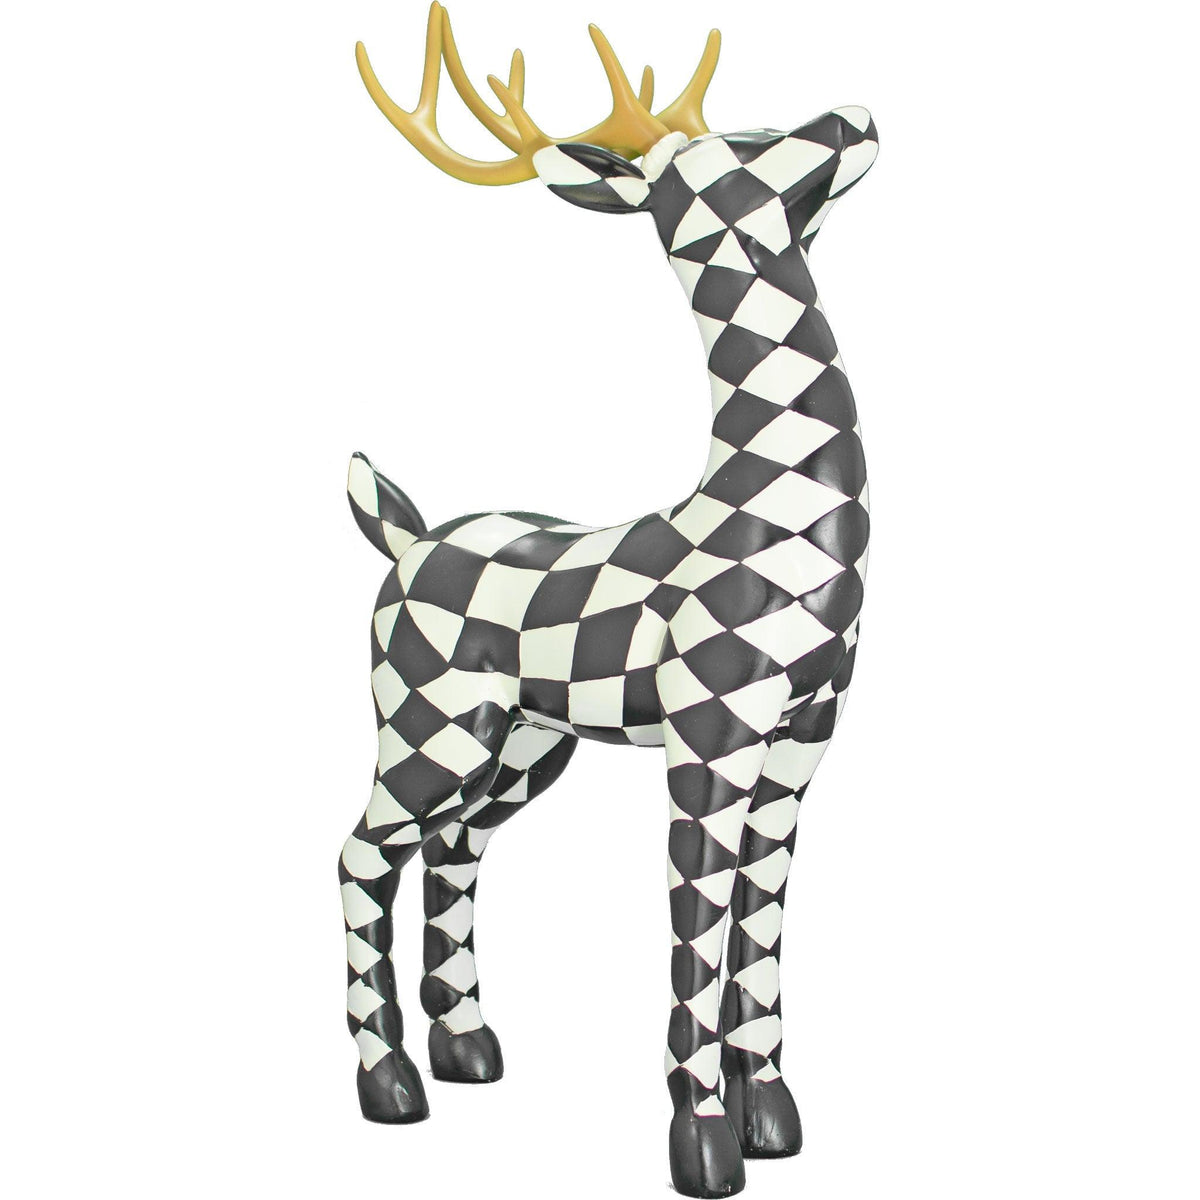 Lee Display's Brand New Black and White Checkered Standing Reindeer on Sale and Available for Rent at leedisplay.com